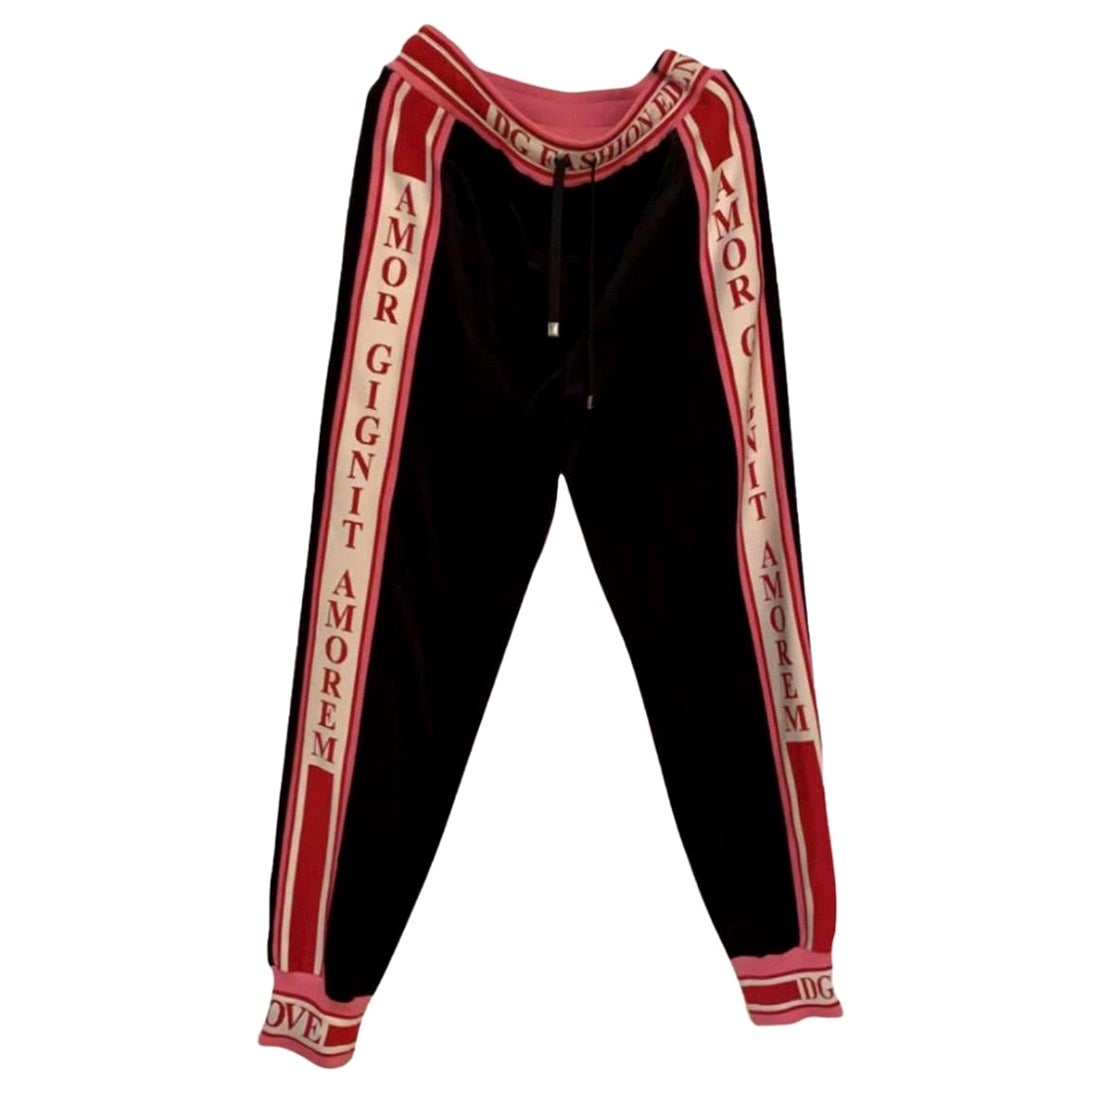 Dolce & Gabbana DG amore black with pink/ red stripes trousers tracksuit pants